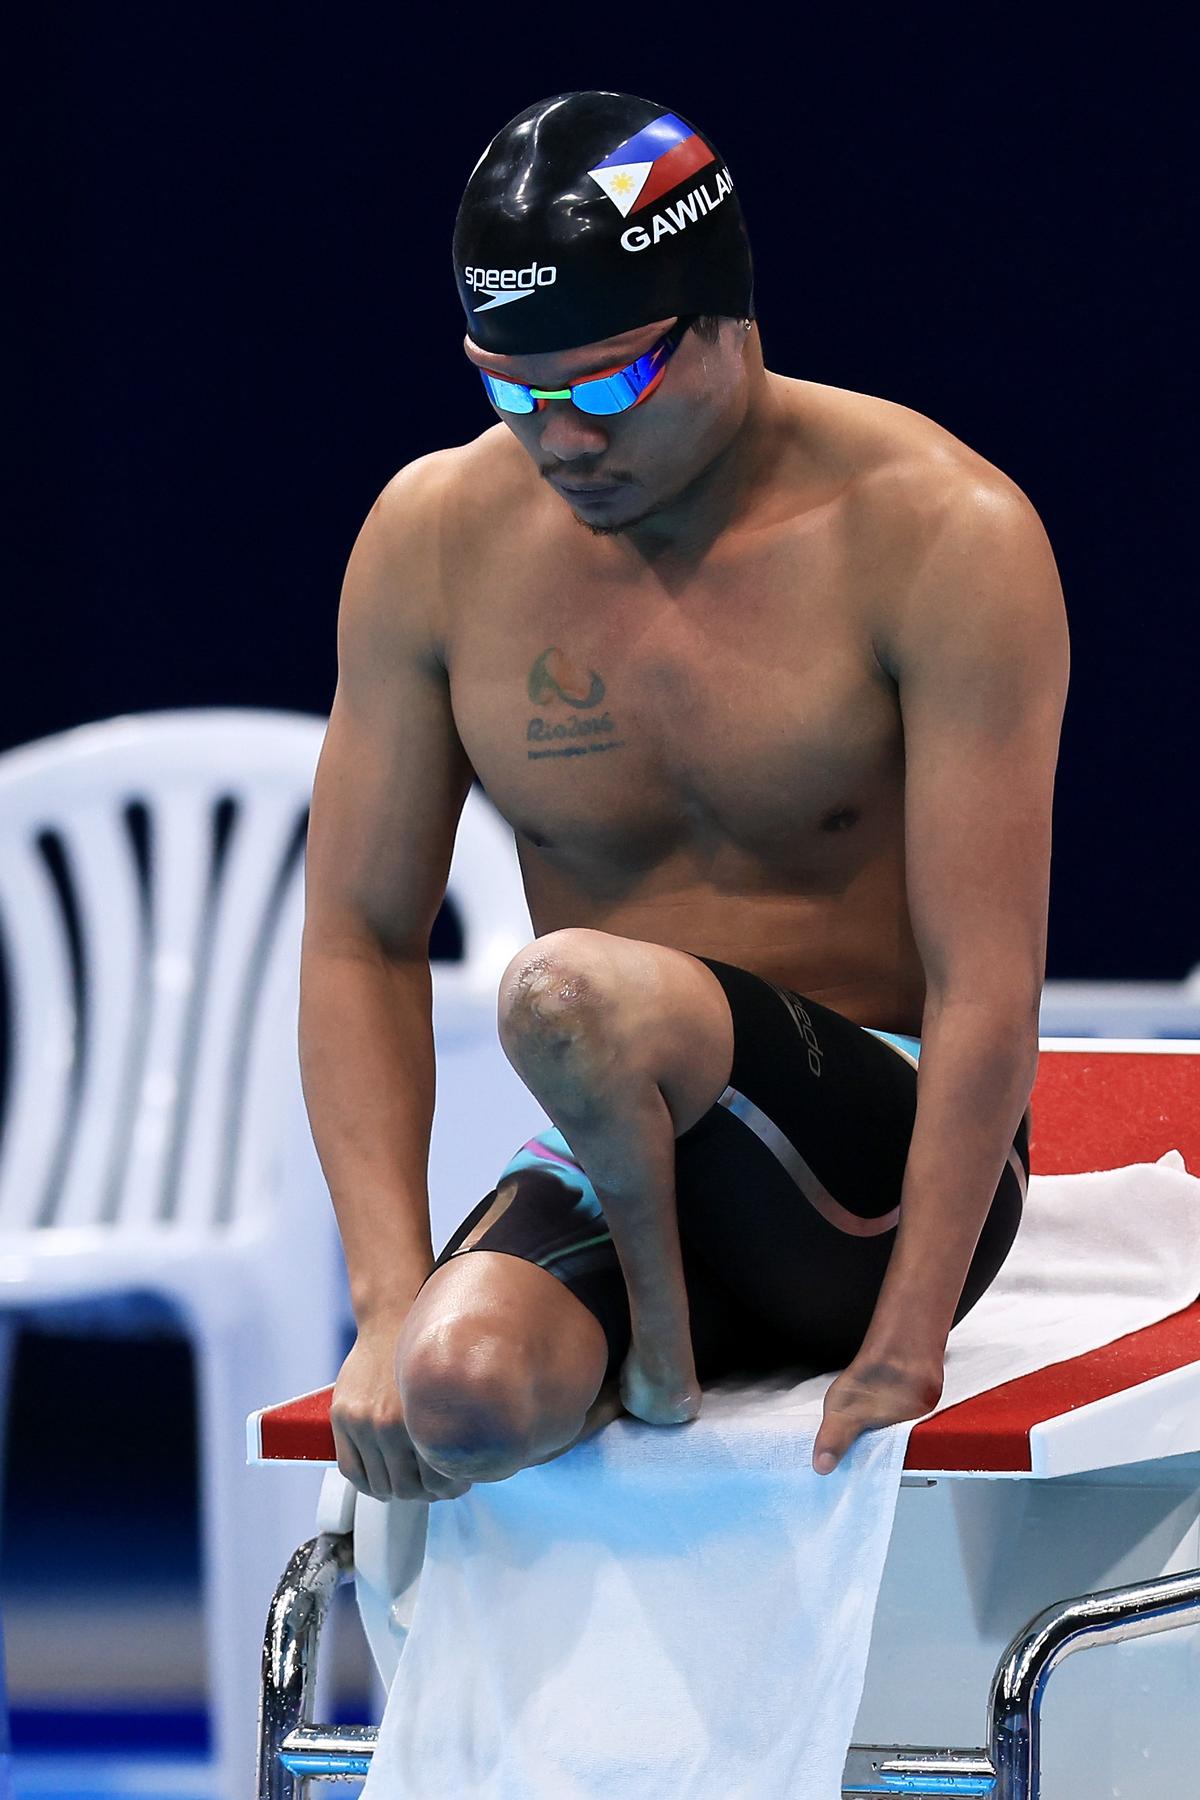 Ernie Gawilan, of Team Philippines, prepares to compete in the Men's 400m Freestyle on day 5 of the Tokyo 2020 Paralympic Games on Aug. 29, 2021. (Buda Mendes/Getty Images)